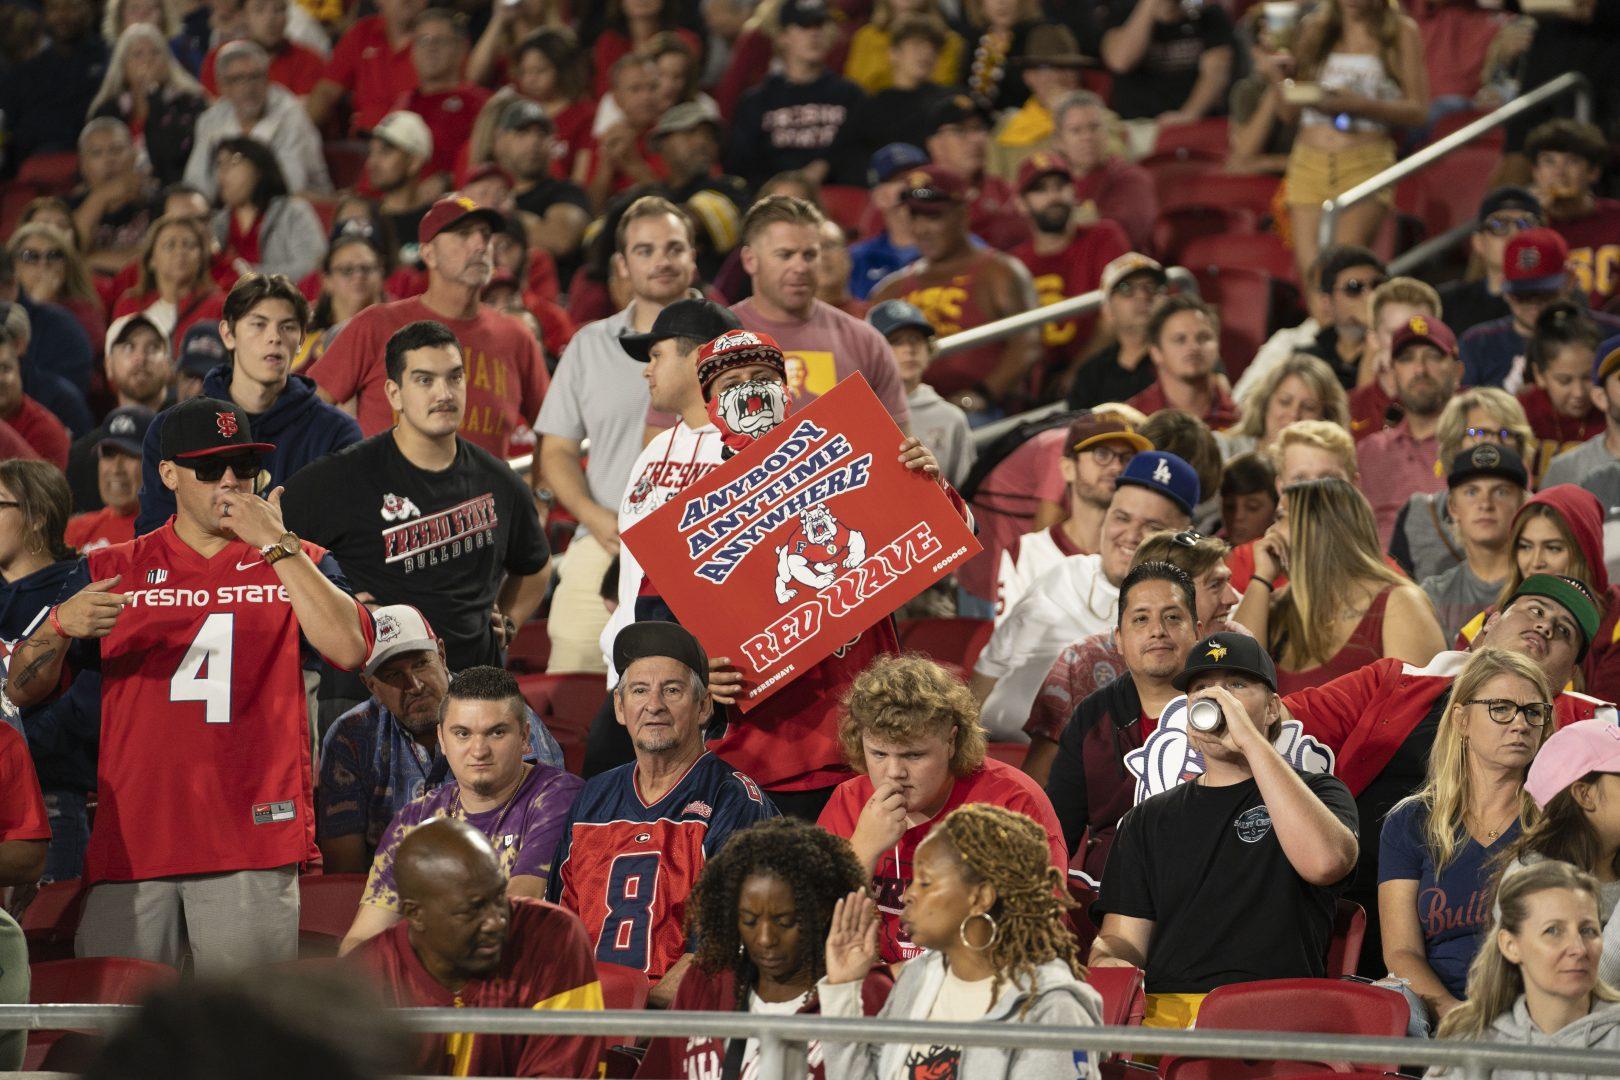 The Red Wave traveled over 200 miles to the Coliseum in the city of Angels. (Blake Wolf/ The Collegian)